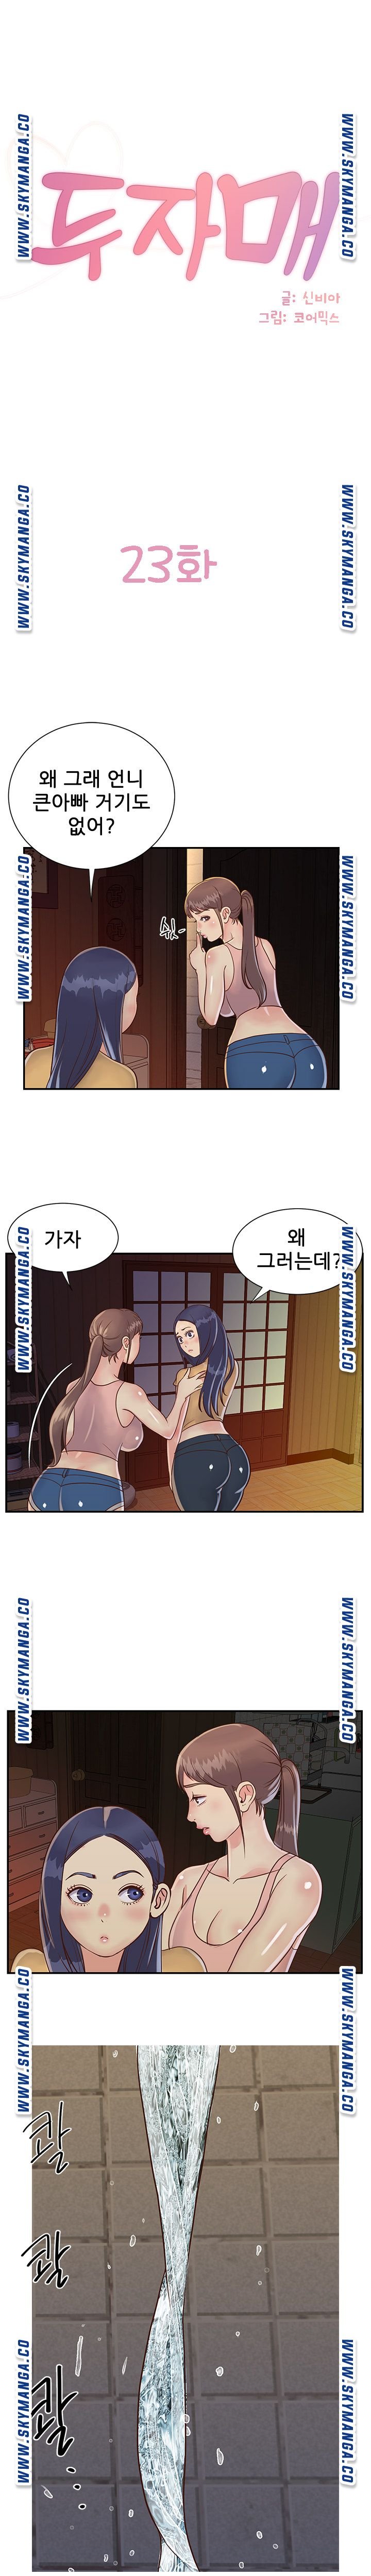 two-sisters-raw-chap-23-0